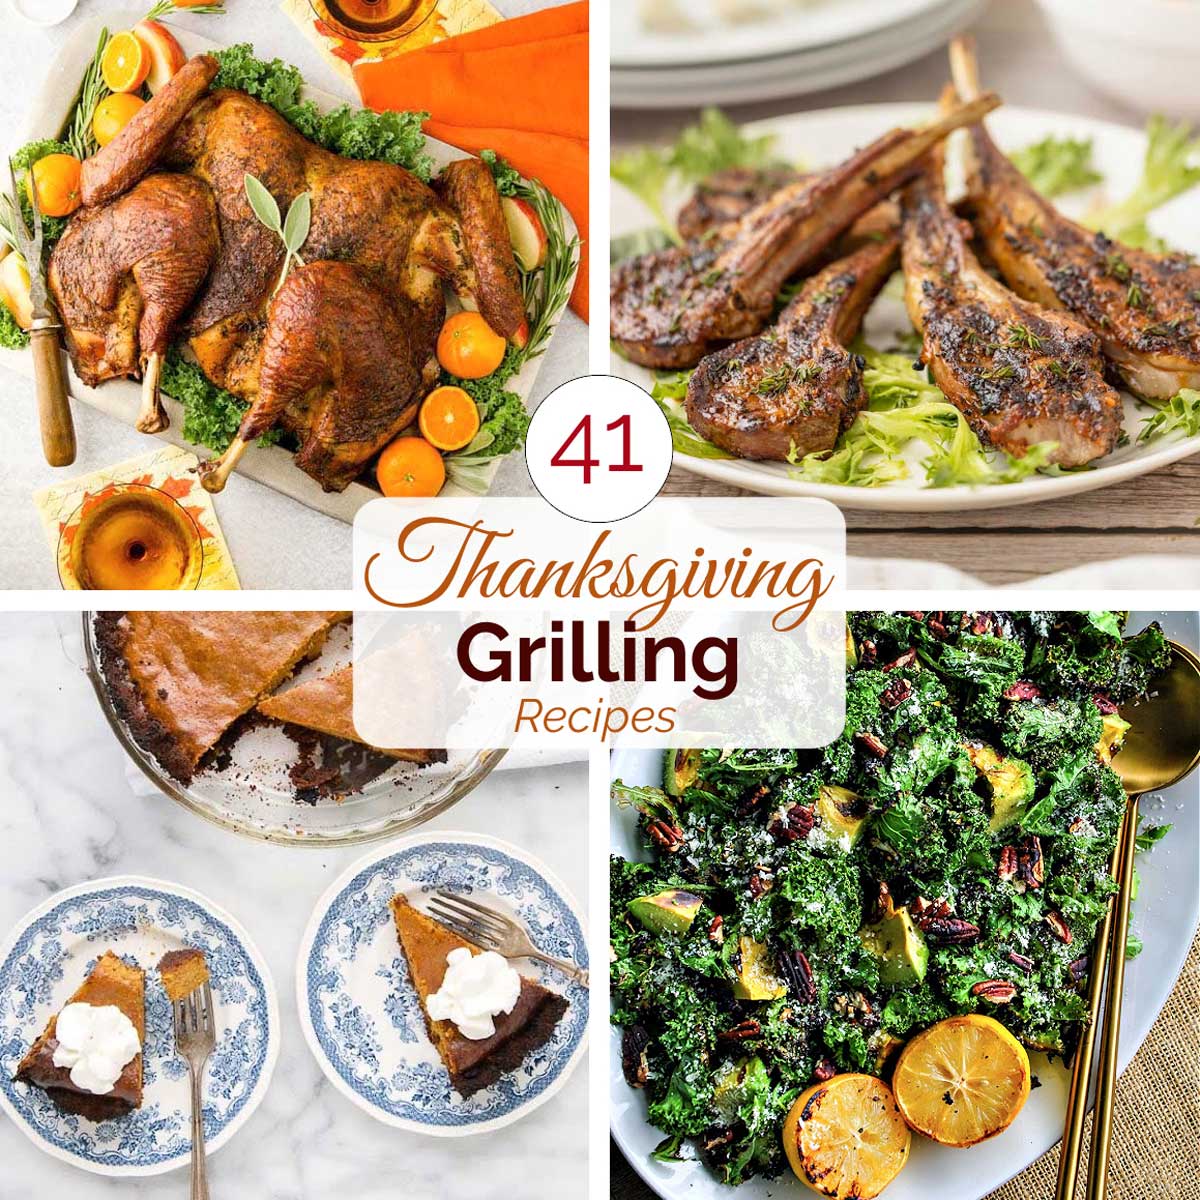 Square collage with four recipe pictures and central text reading "41 Thanksgiving Grilling Recipes".